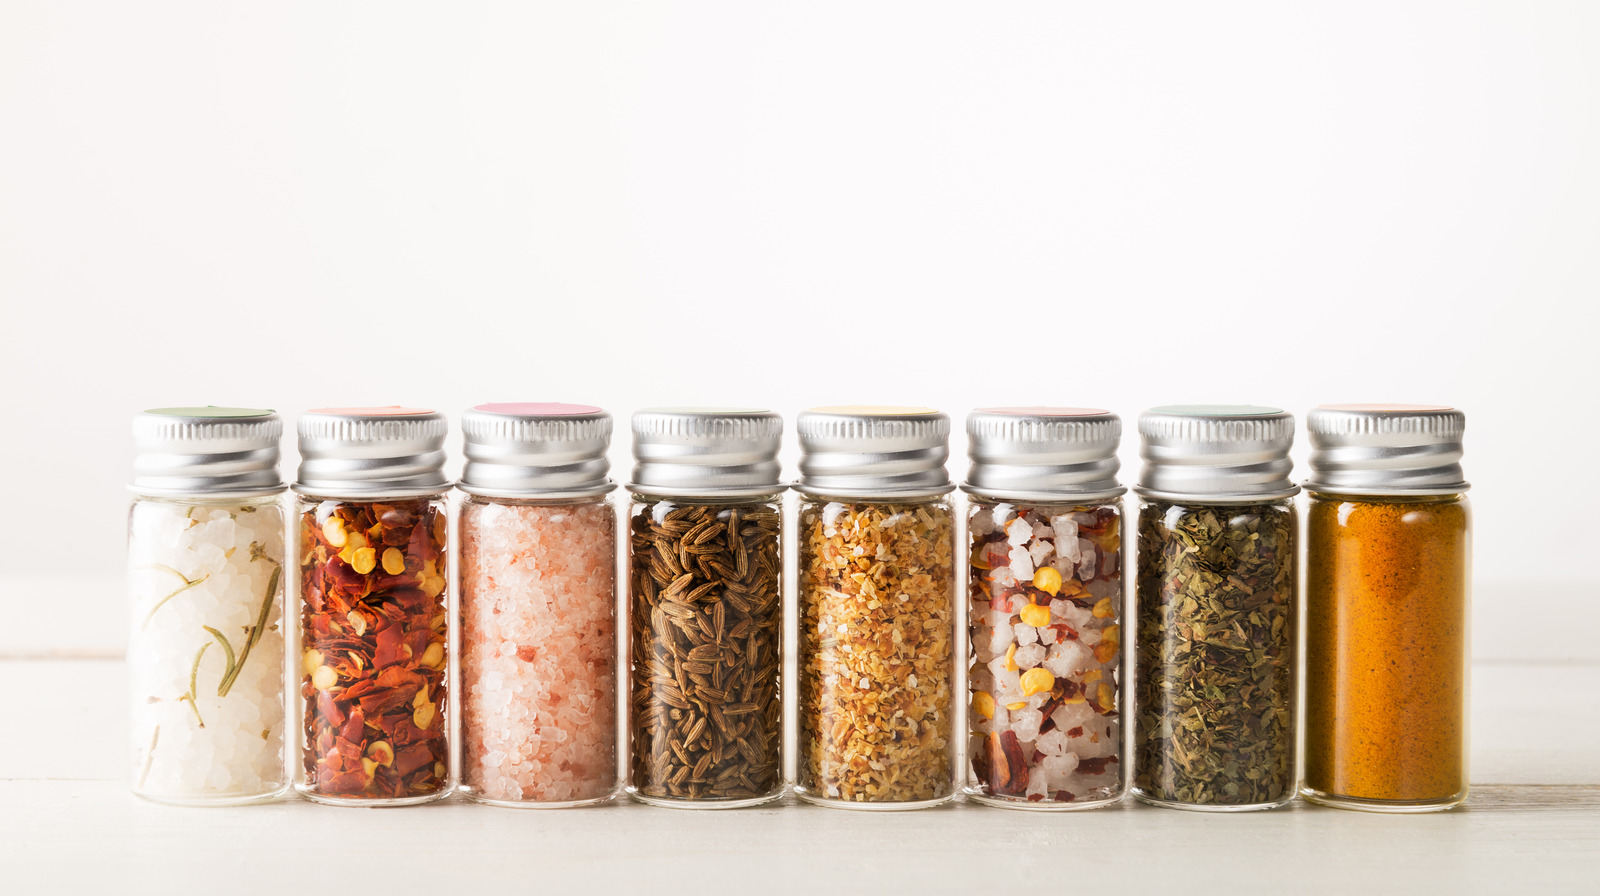 https://www.mashed.com/img/gallery/new-study-reveals-that-spice-containers-are-crawling-with-contamination/l-intro-1673717608.jpg